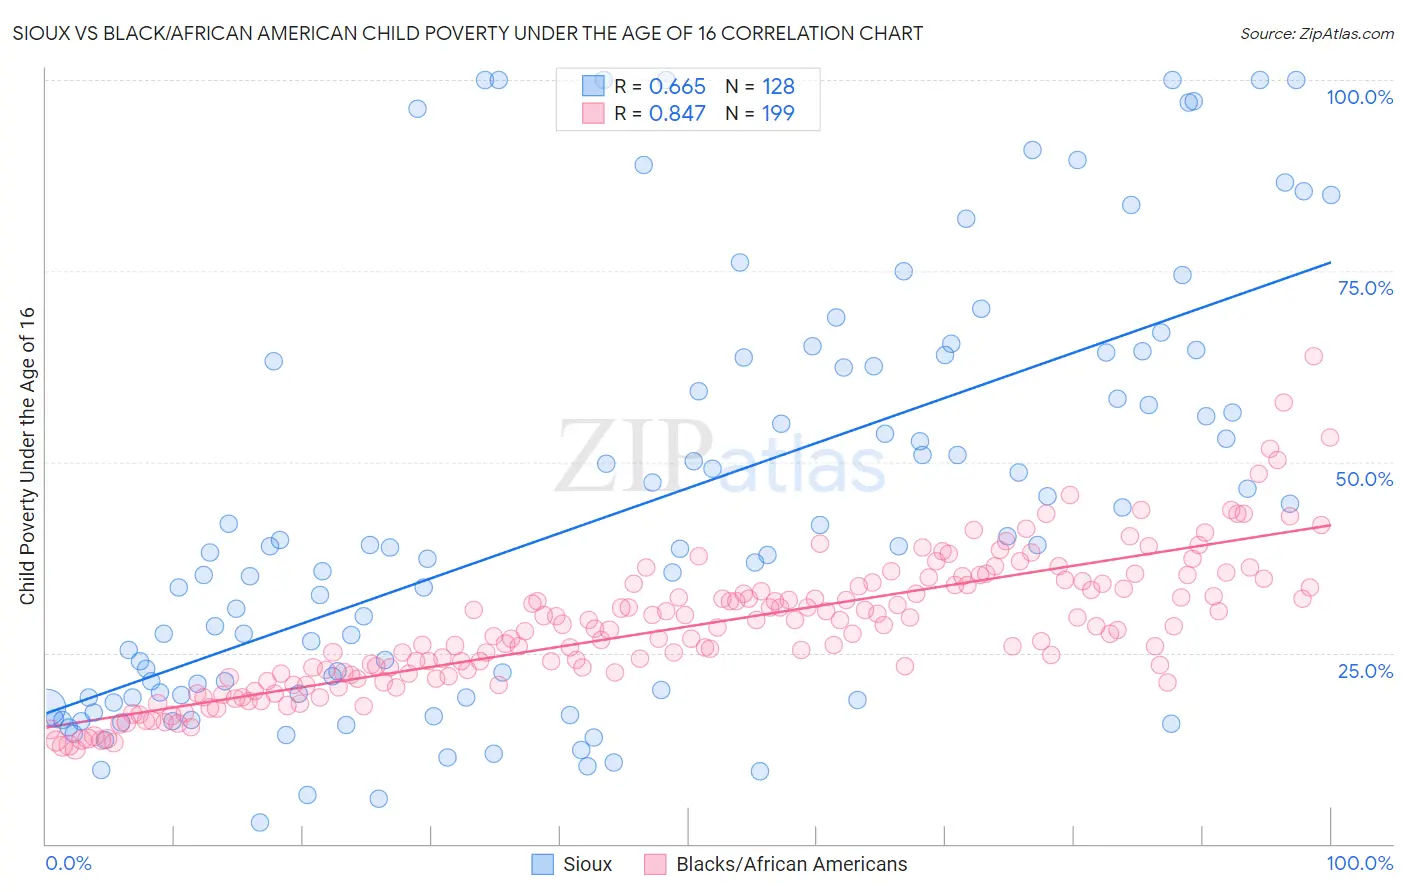 Sioux vs Black/African American Child Poverty Under the Age of 16